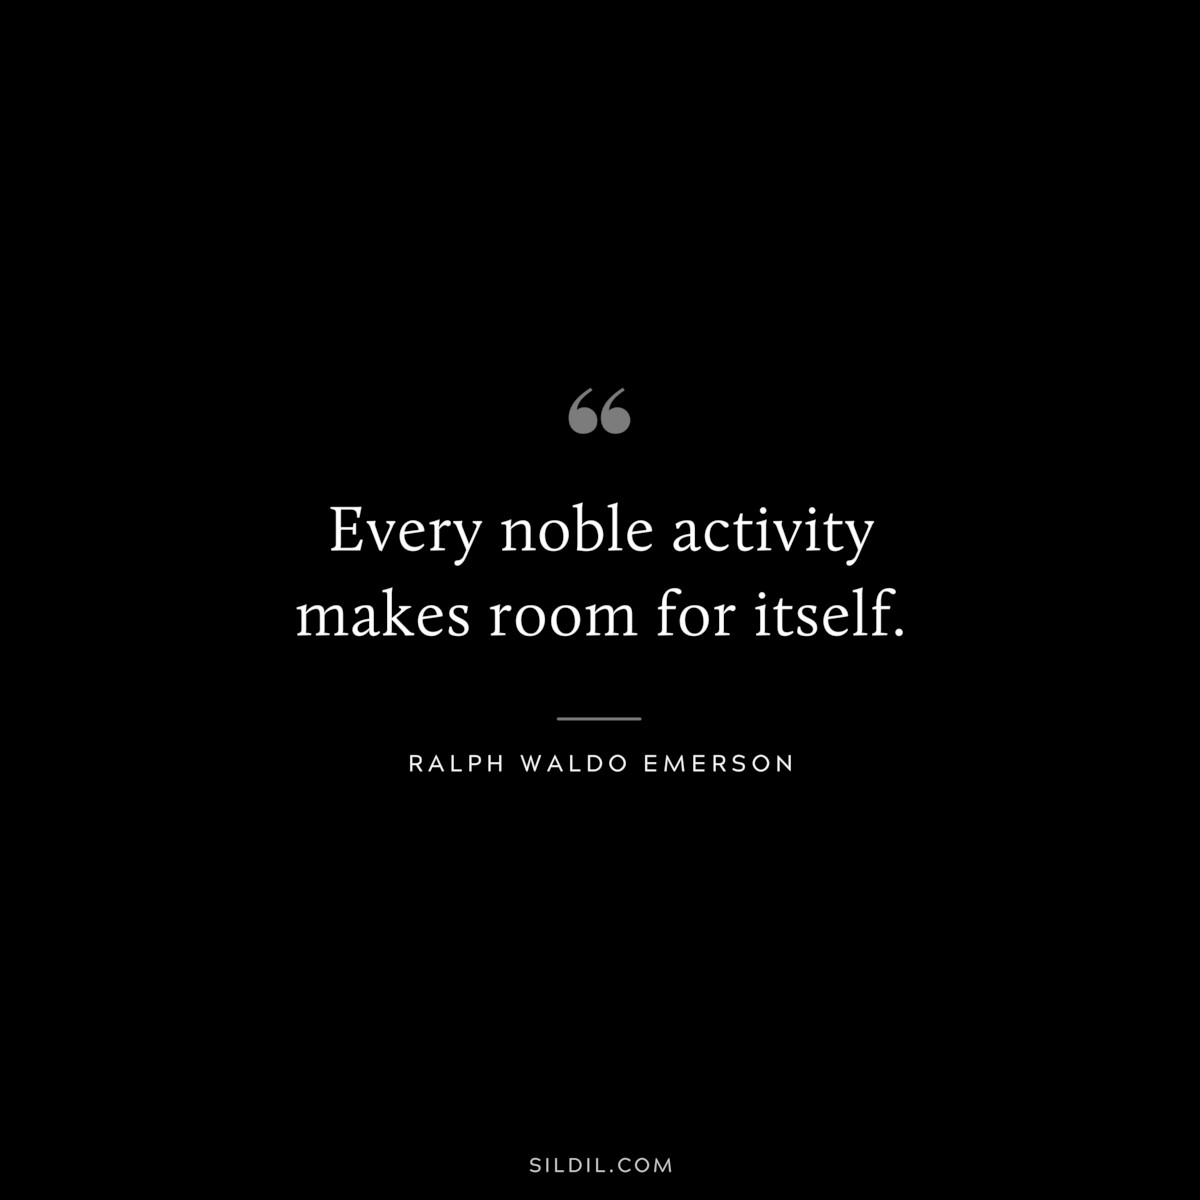 Every noble activity makes room for itself. — Ralph Waldo Emerson